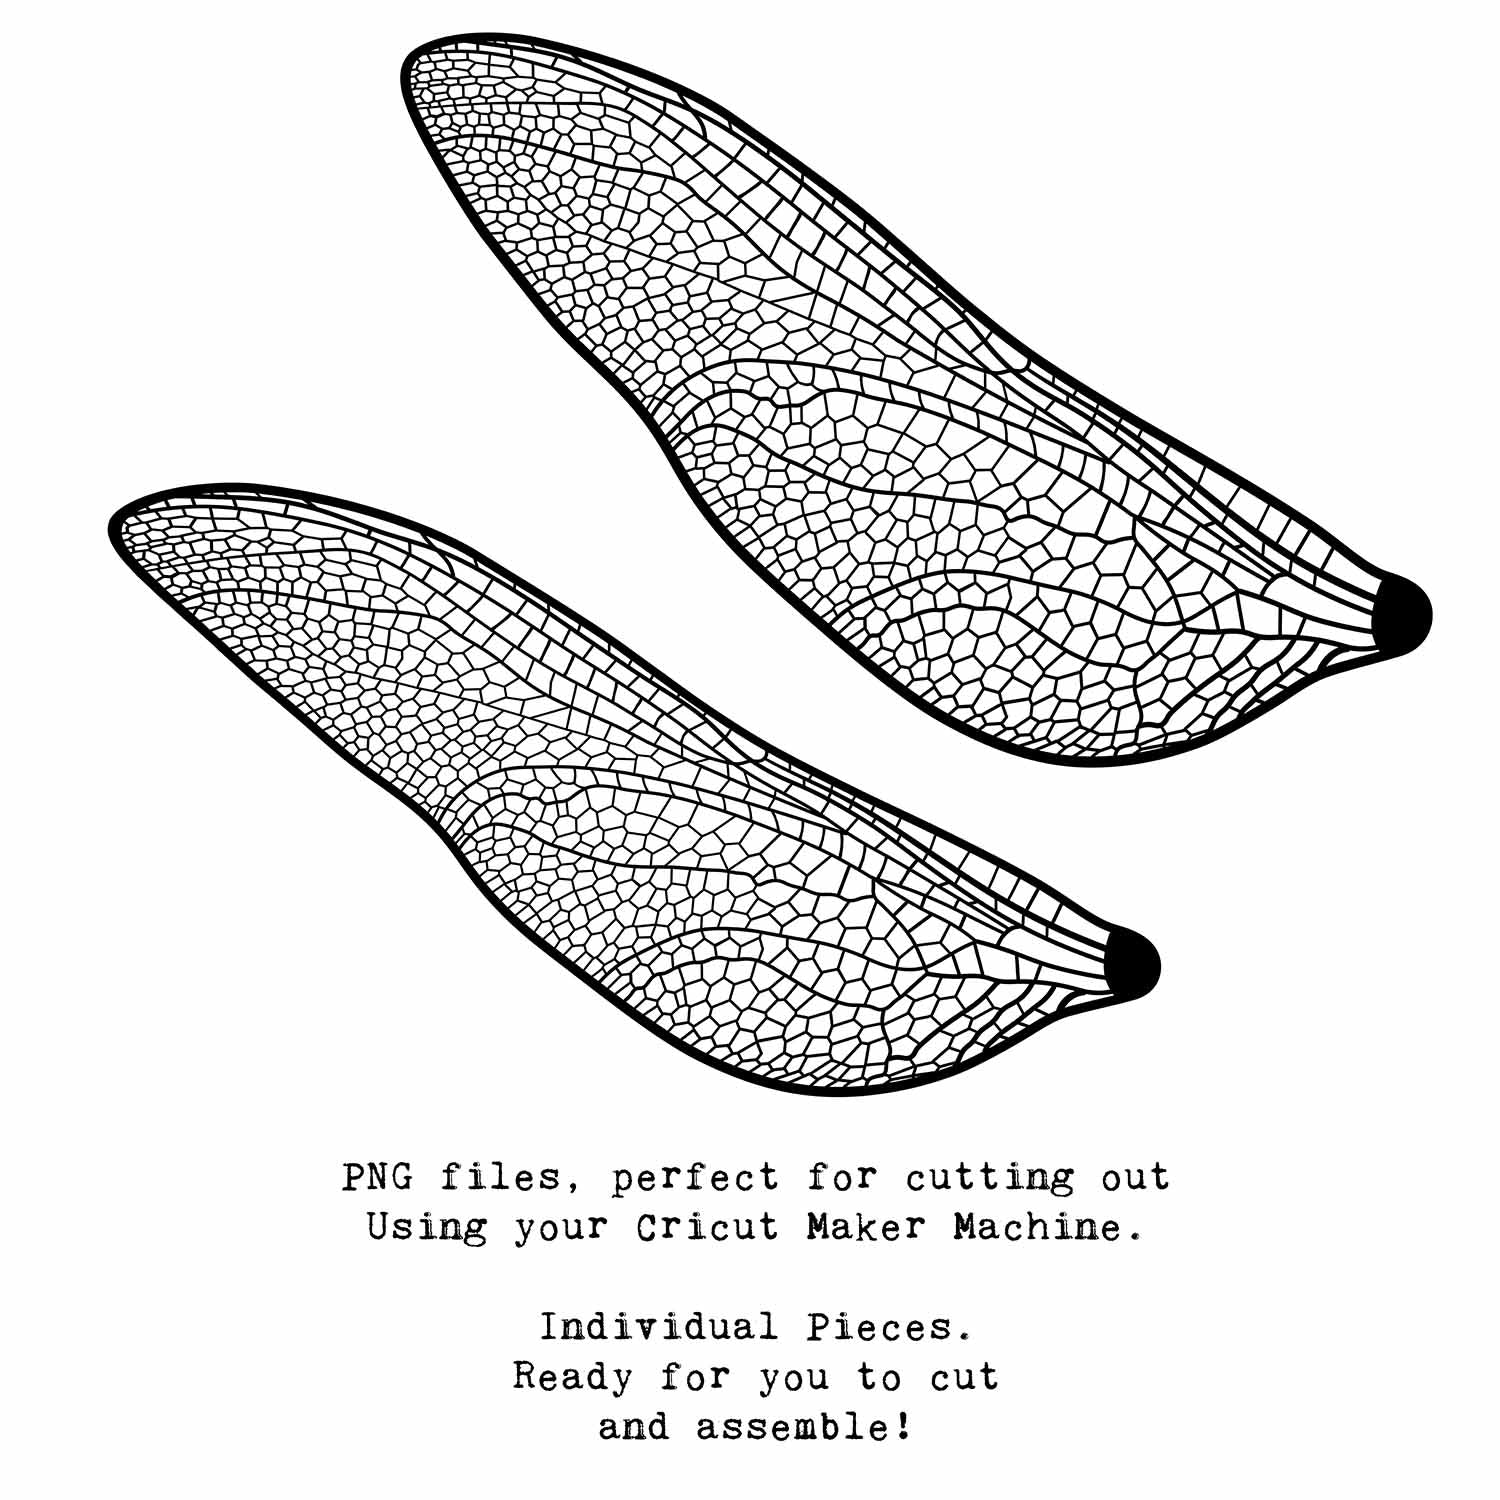 SVG & PNG Fairy Wing files for Cricut or Silhouette Cameo Cutting Machine. To create wearable fairy wings, in adult or children sizes.  Use this clipart design for Halloween Costumes, Fantasy or Cosplay or photography. These are Individual Wing Pieces, for you to cut and assemble. This is a digital product. 